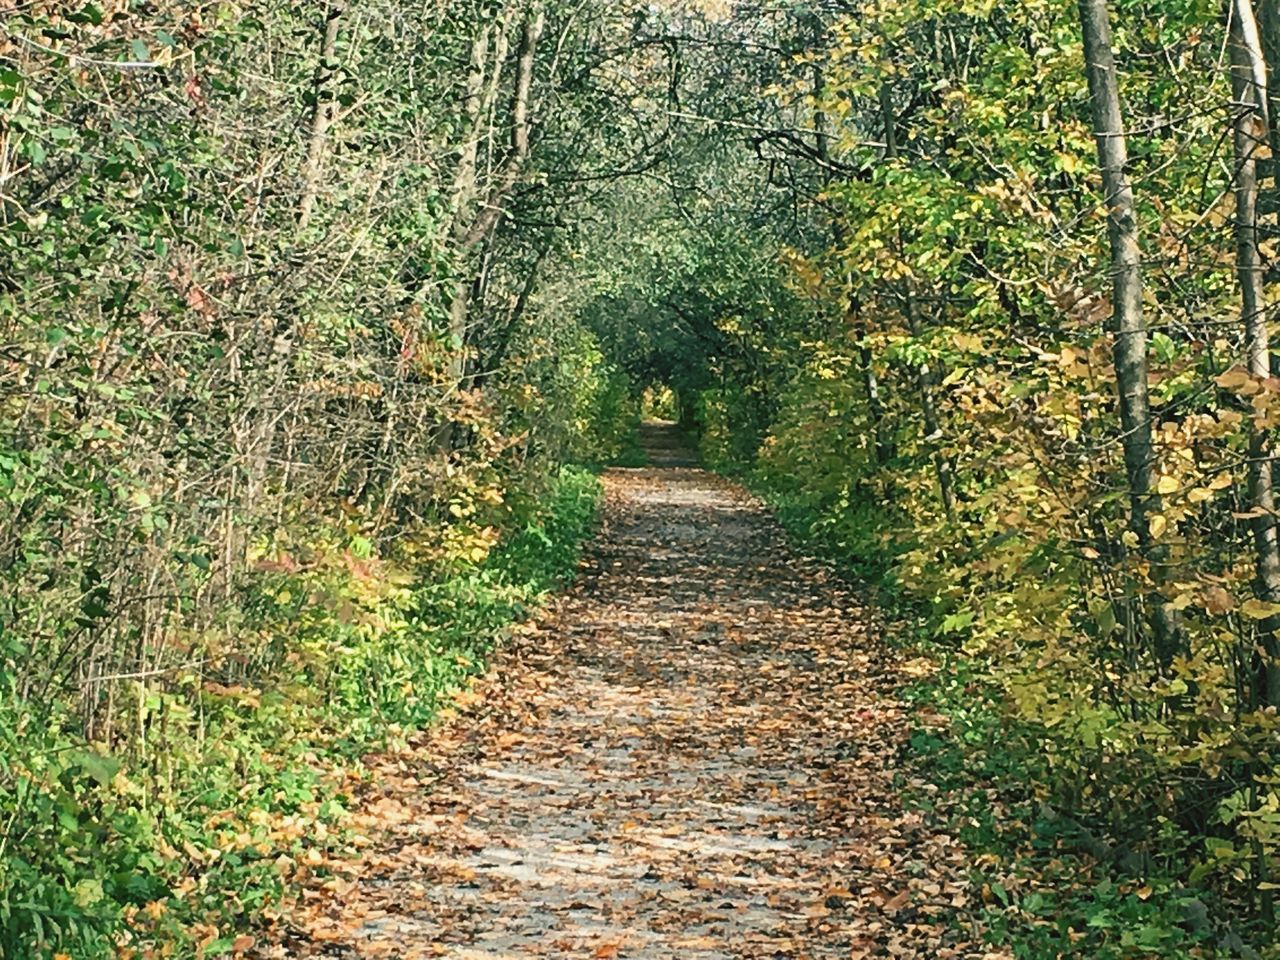 VIEW OF FOOTPATH IN FOREST